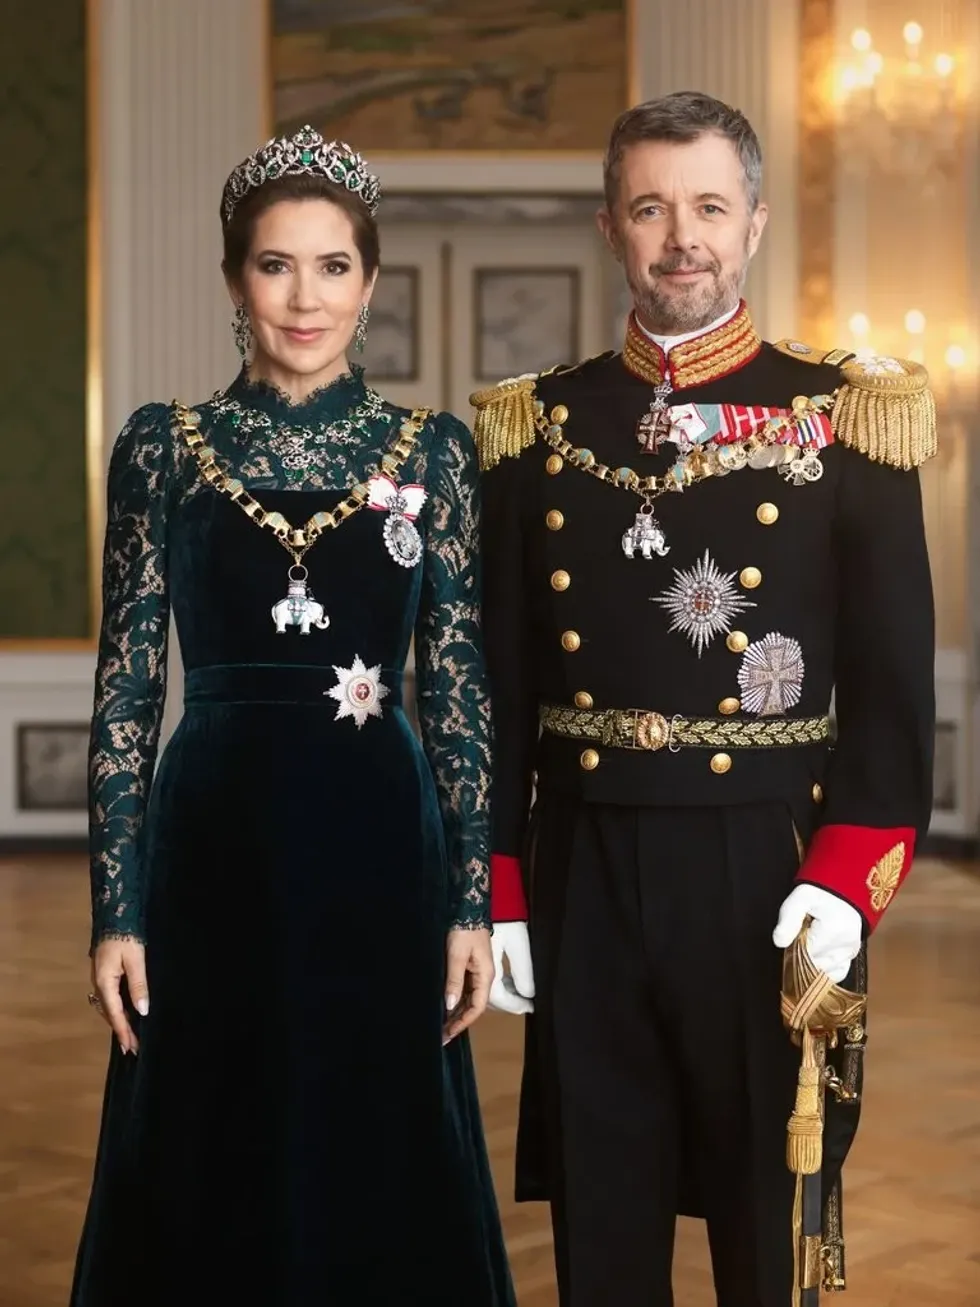 Queen Mary and King Frederik